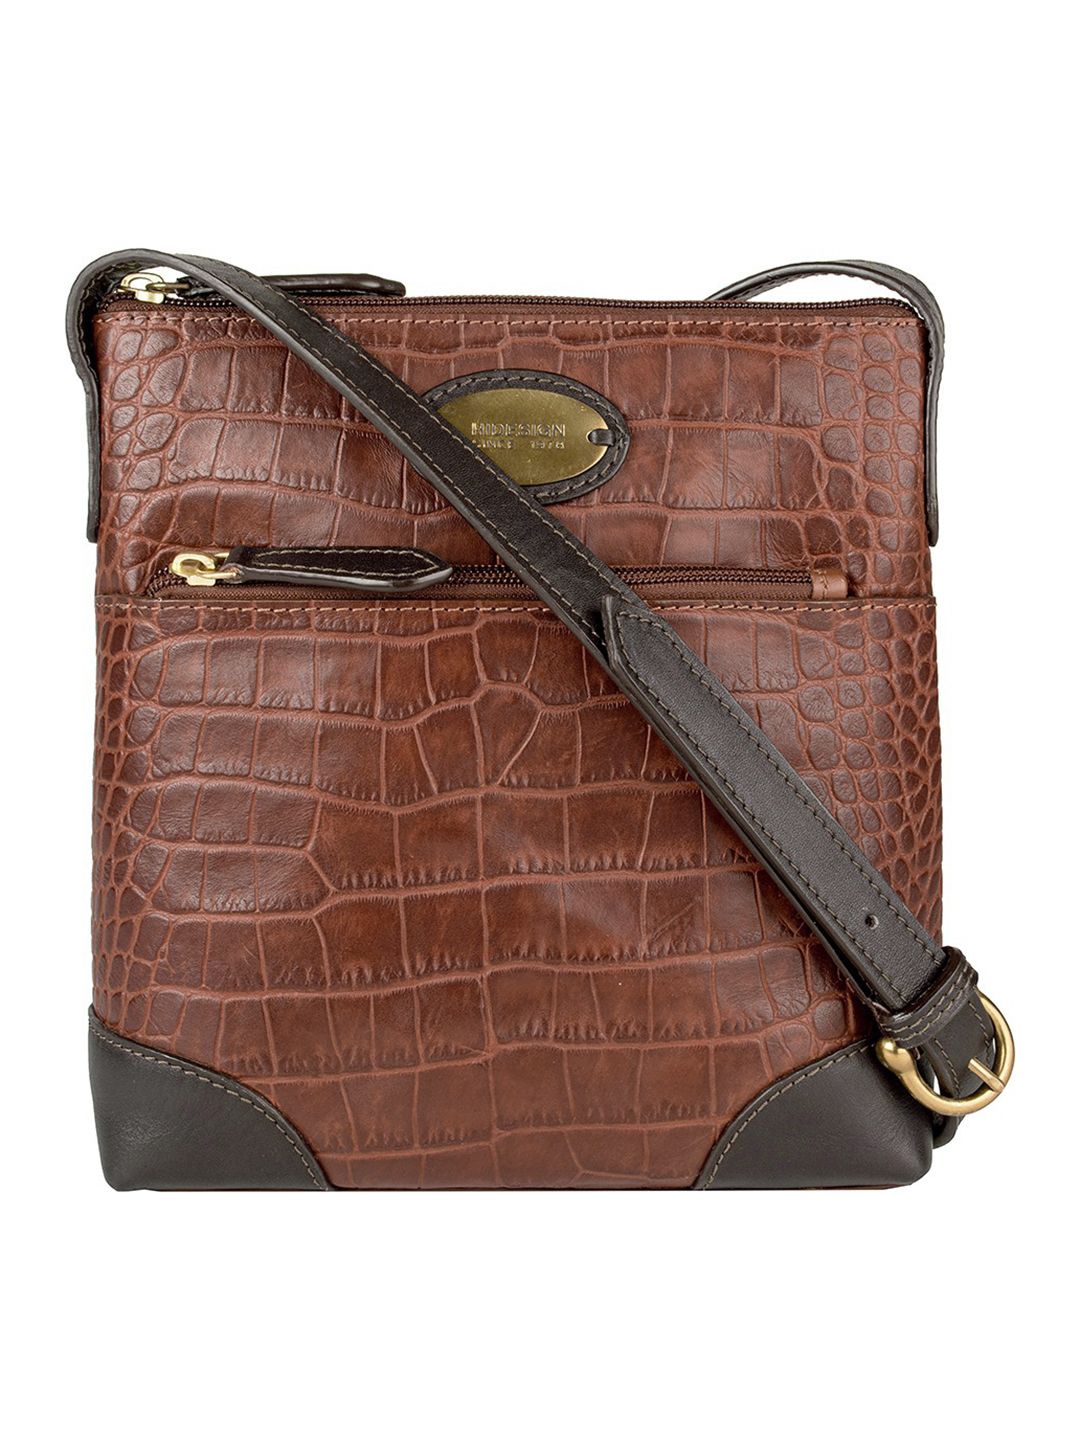 Hidesign Brown Textured Leather Structured Sling Bag Price in India